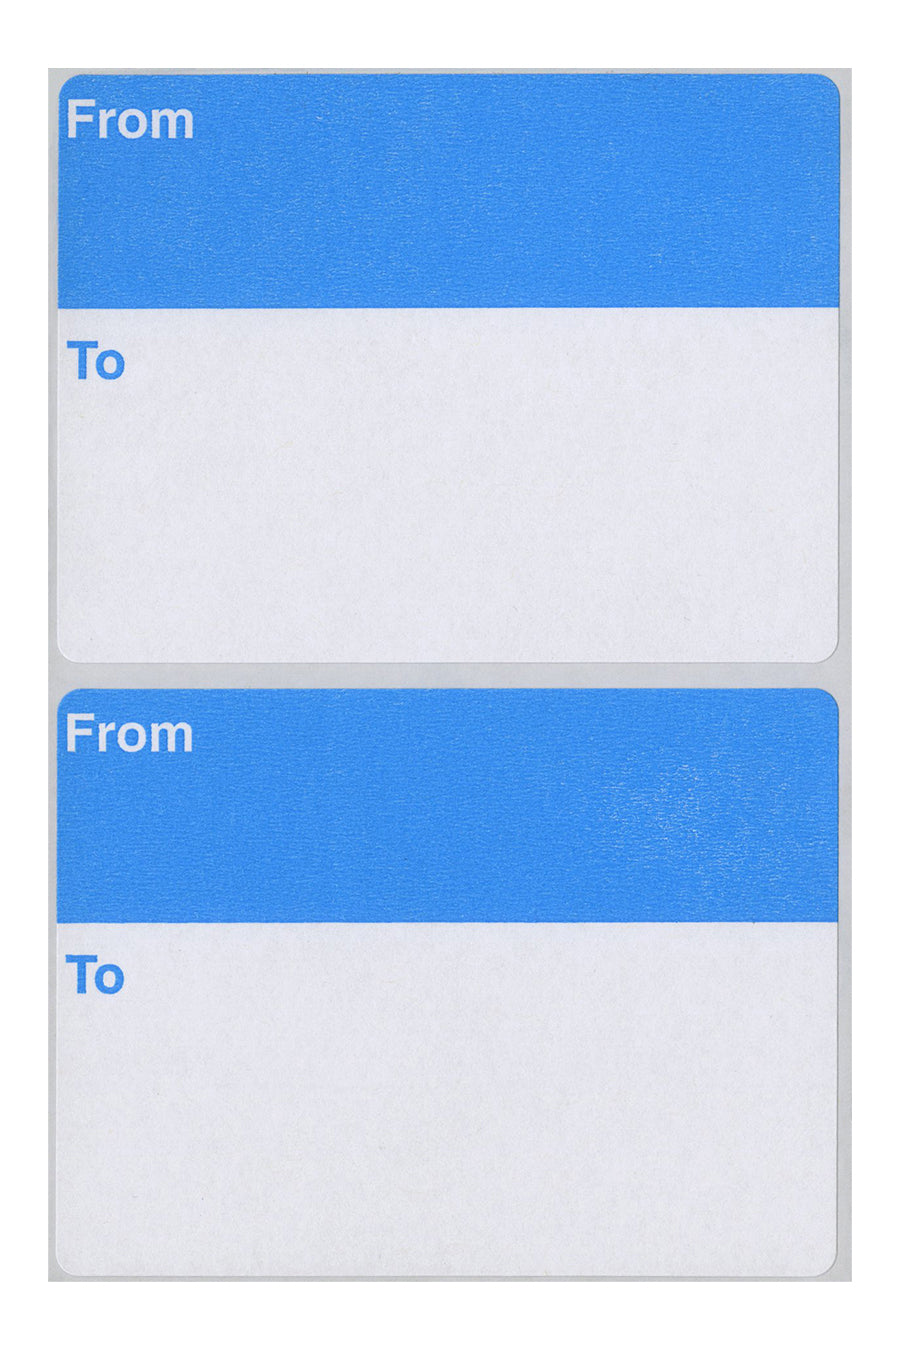 From/To Mailing Labels, 3" x 4", Blue & White, 60/Bx